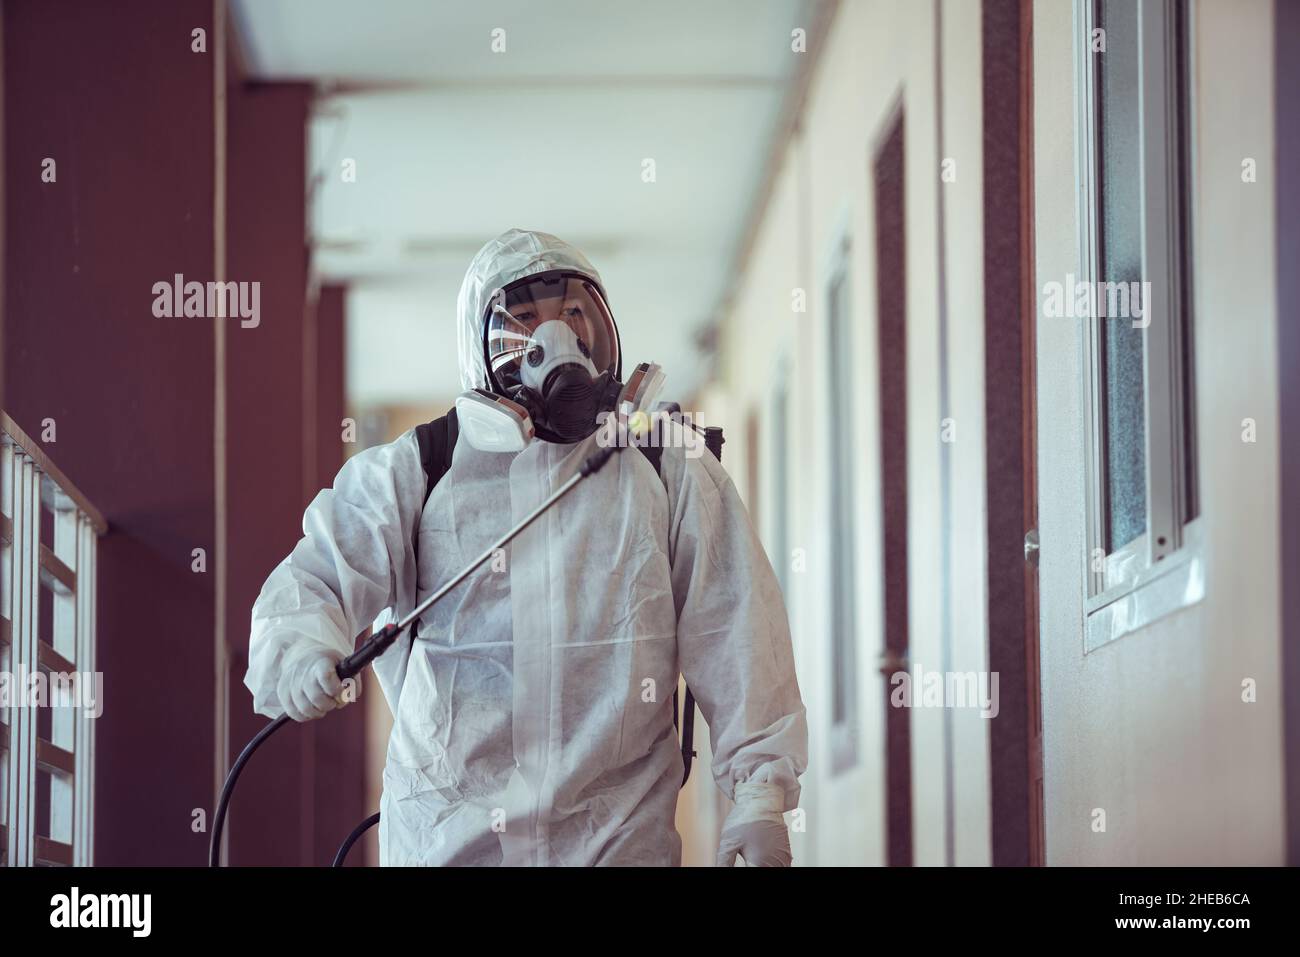 Medical staff wearing PPE spraying disinfectant against the spread of the virus Stock Photo